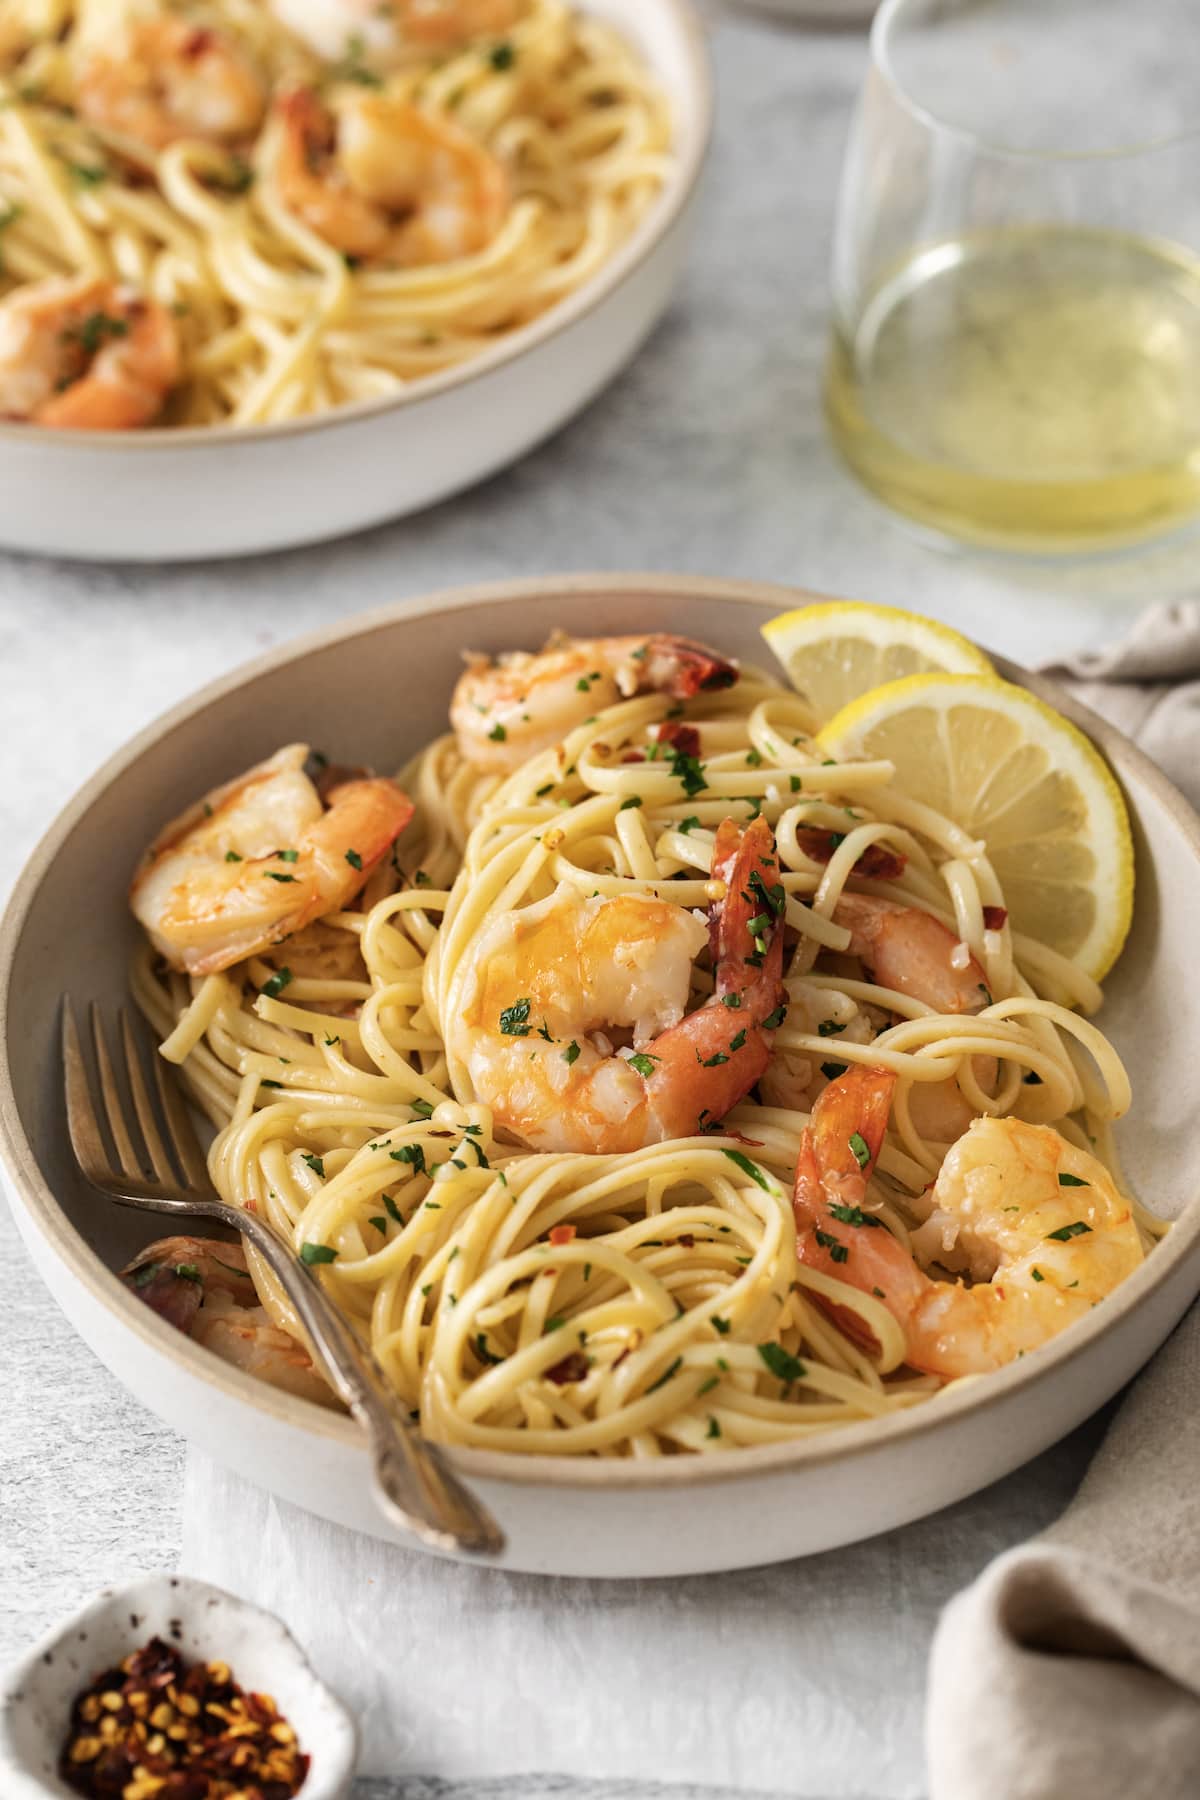 shrimp pasta with linguine, red pepper flakes, herbs, and lemon slices in a bowl